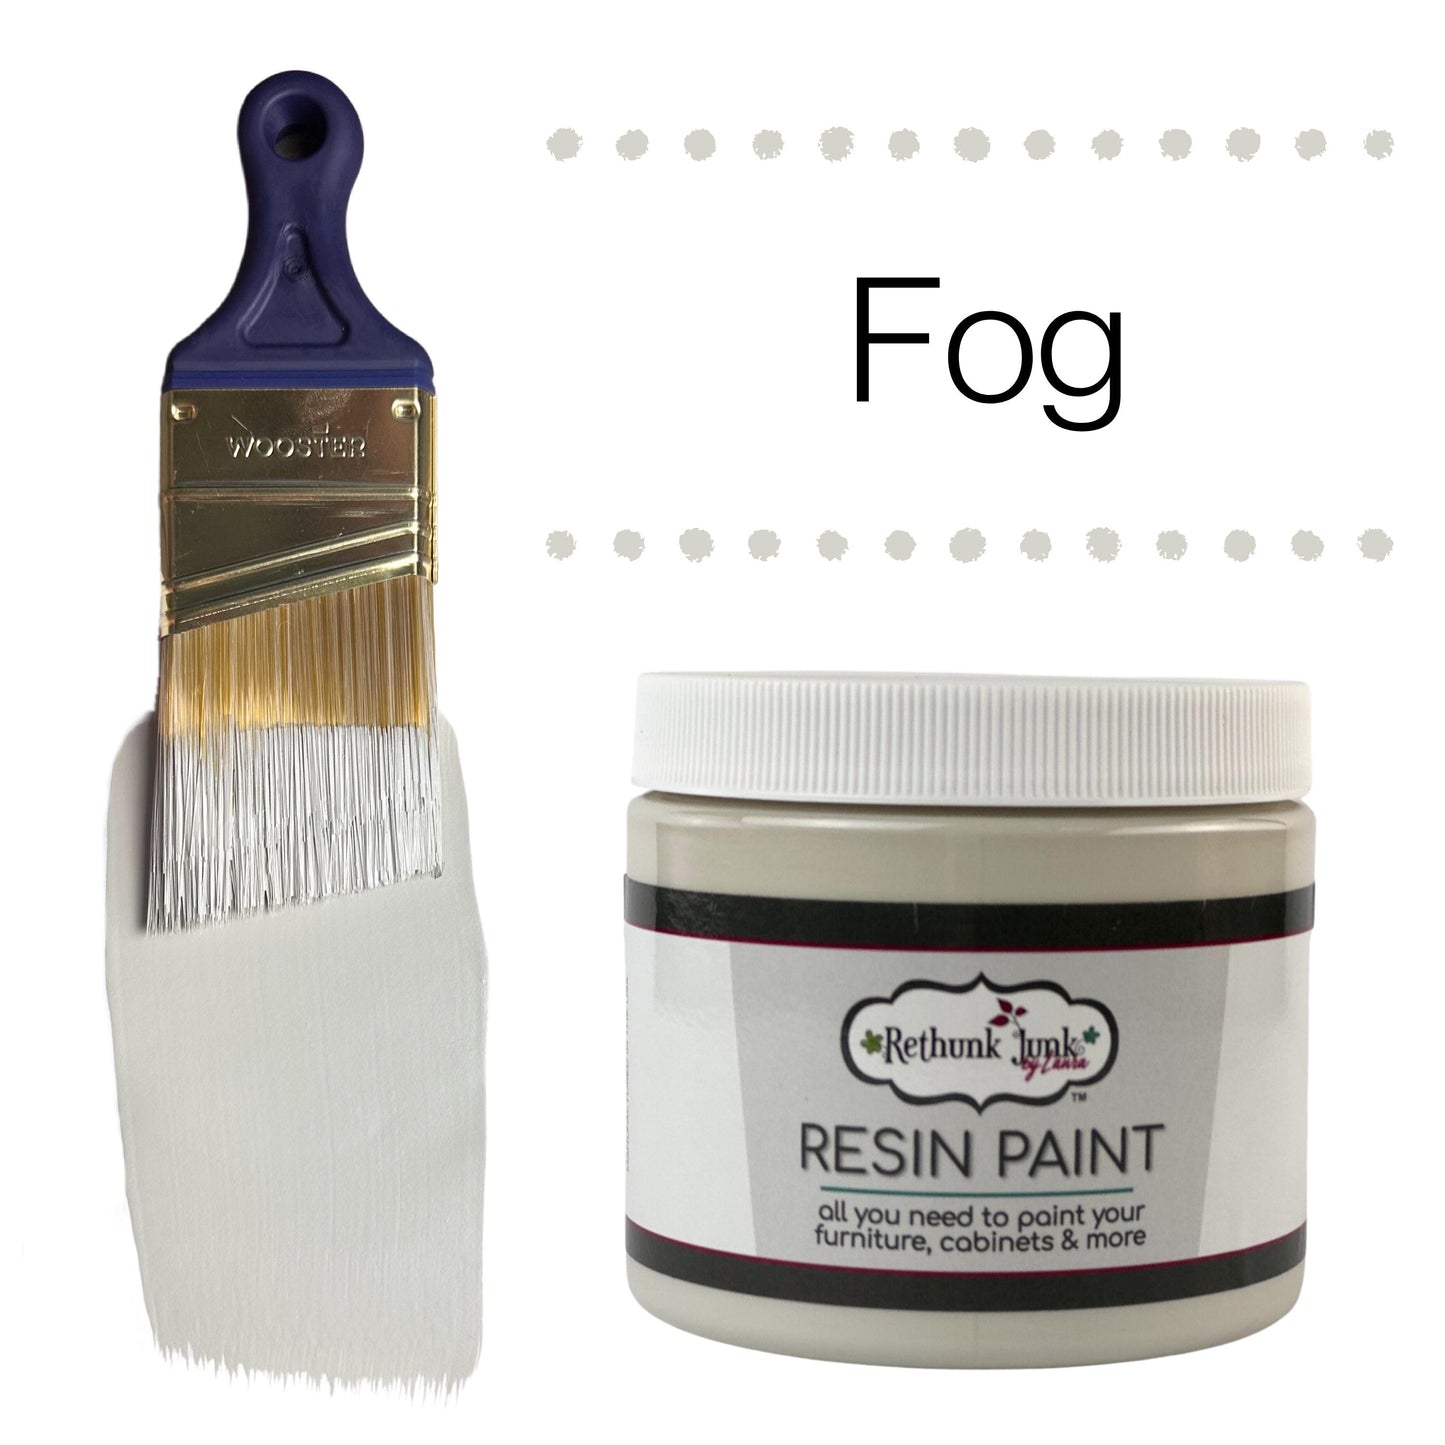 Rethunk Junk Resin Paint in Fog